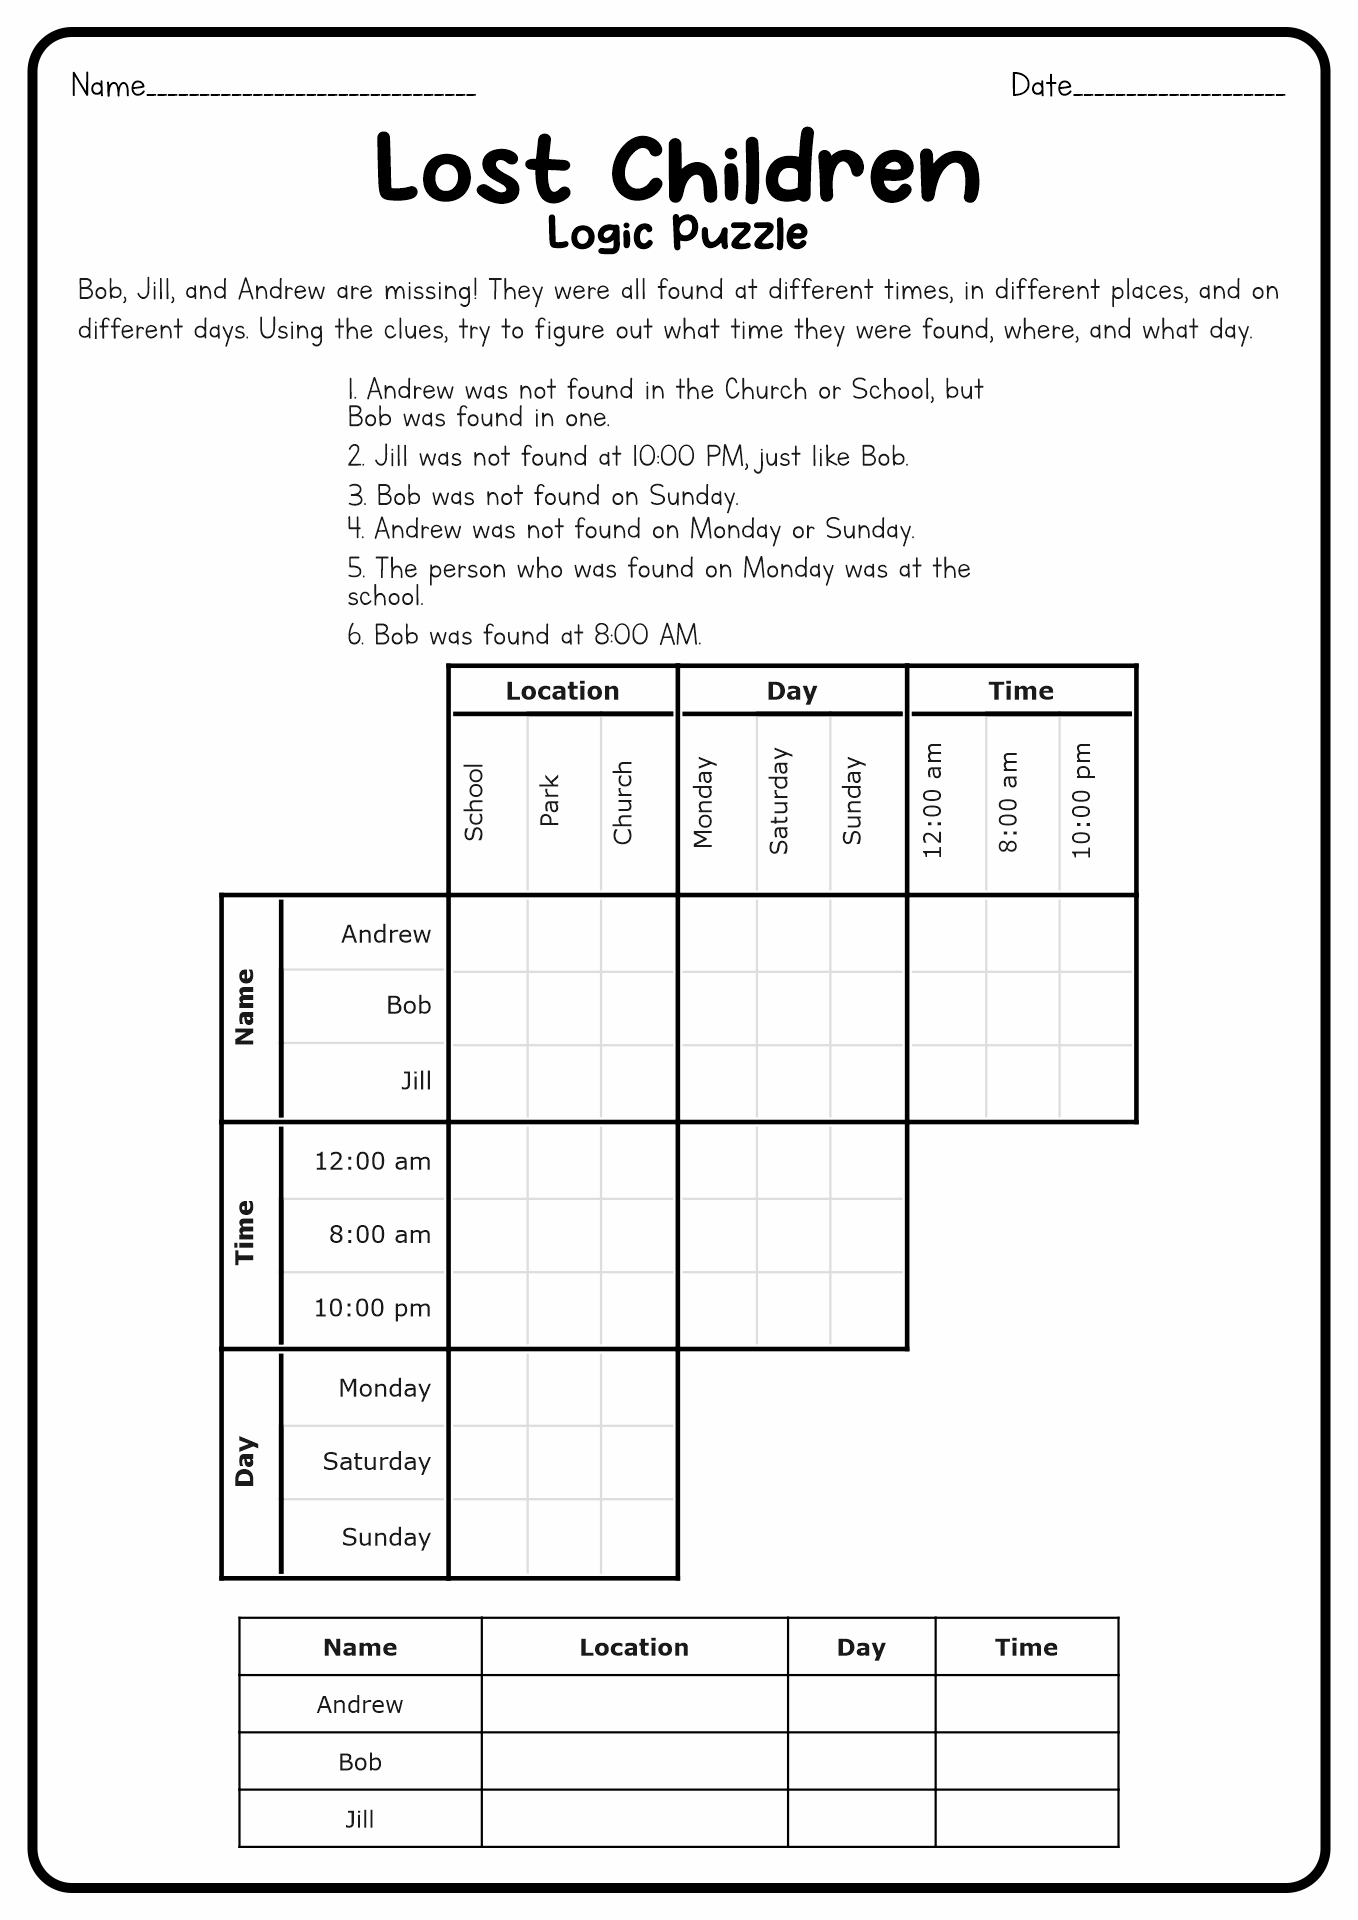 Printable Logic Puzzles Free - Customize and Print